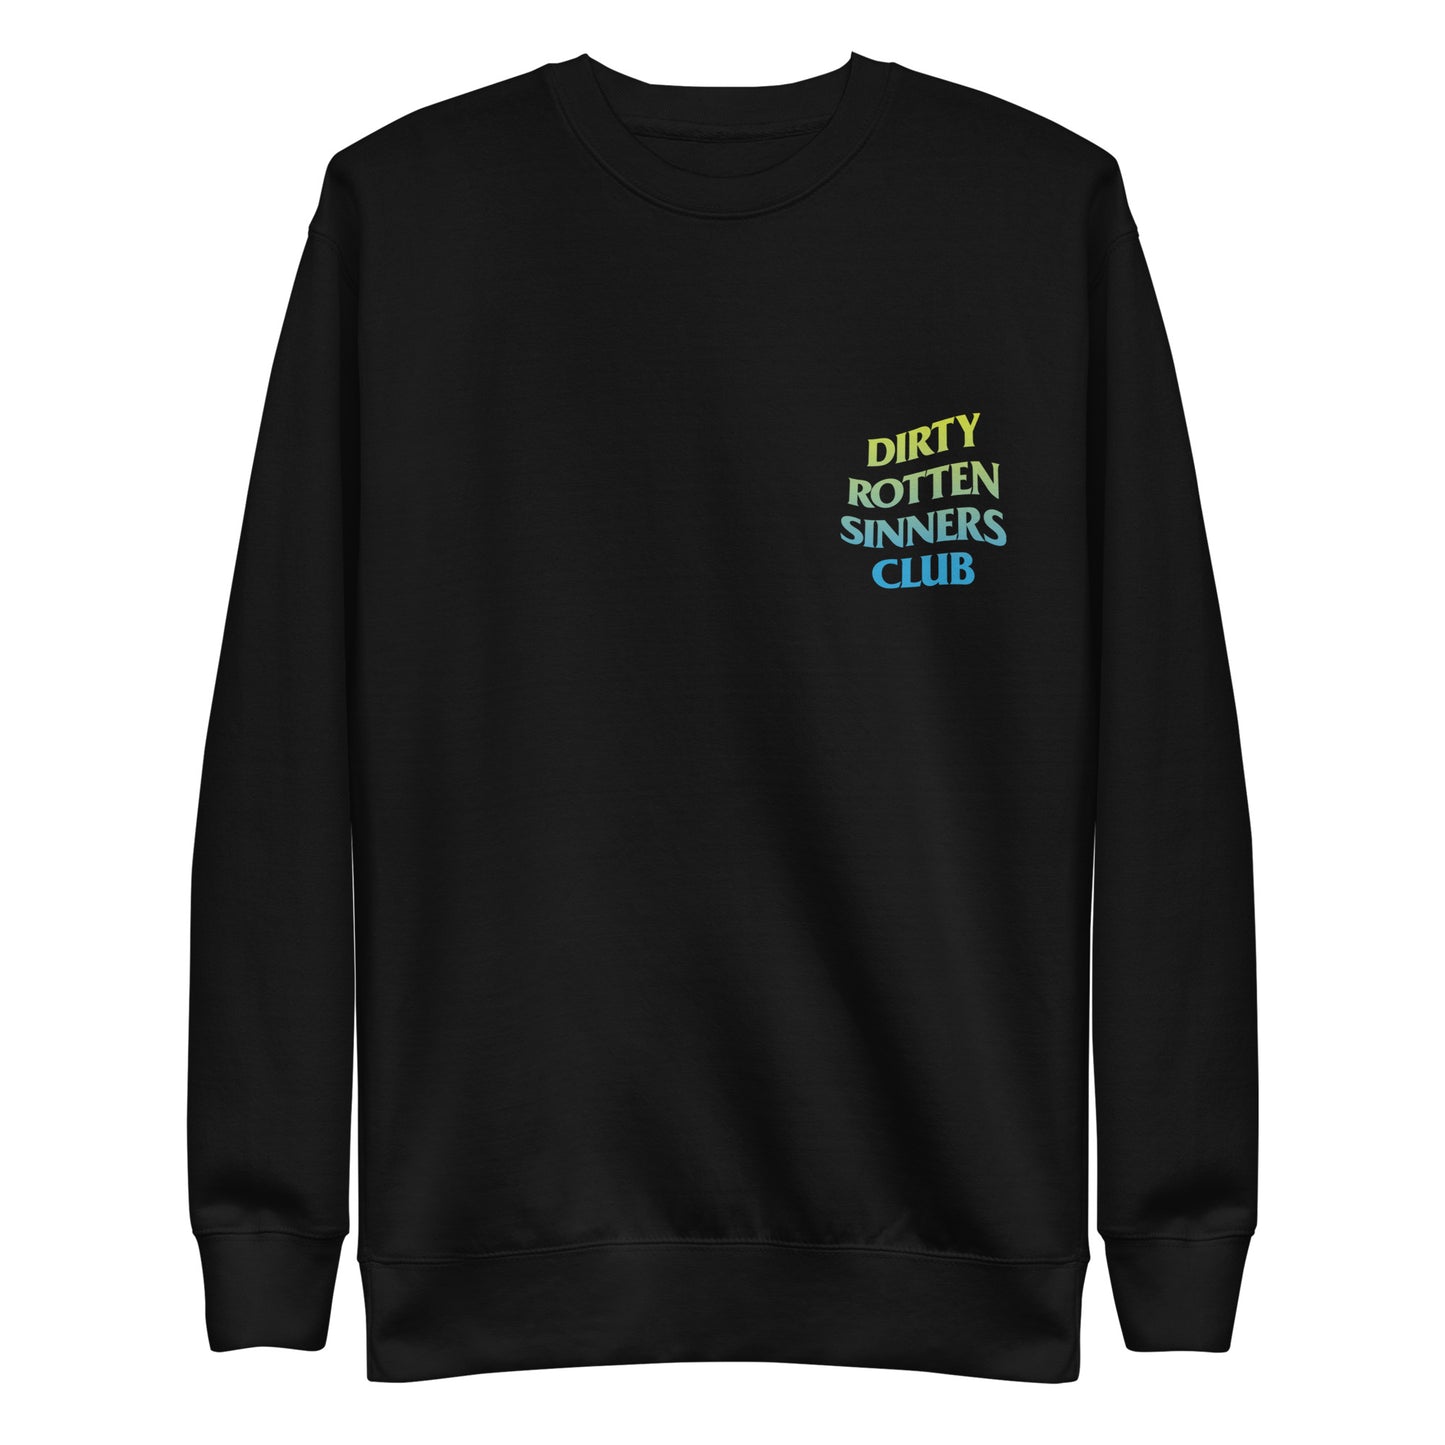 Dirty Rotten Sinners Club Sweatshirt (Green/Blue) - For Your Courage